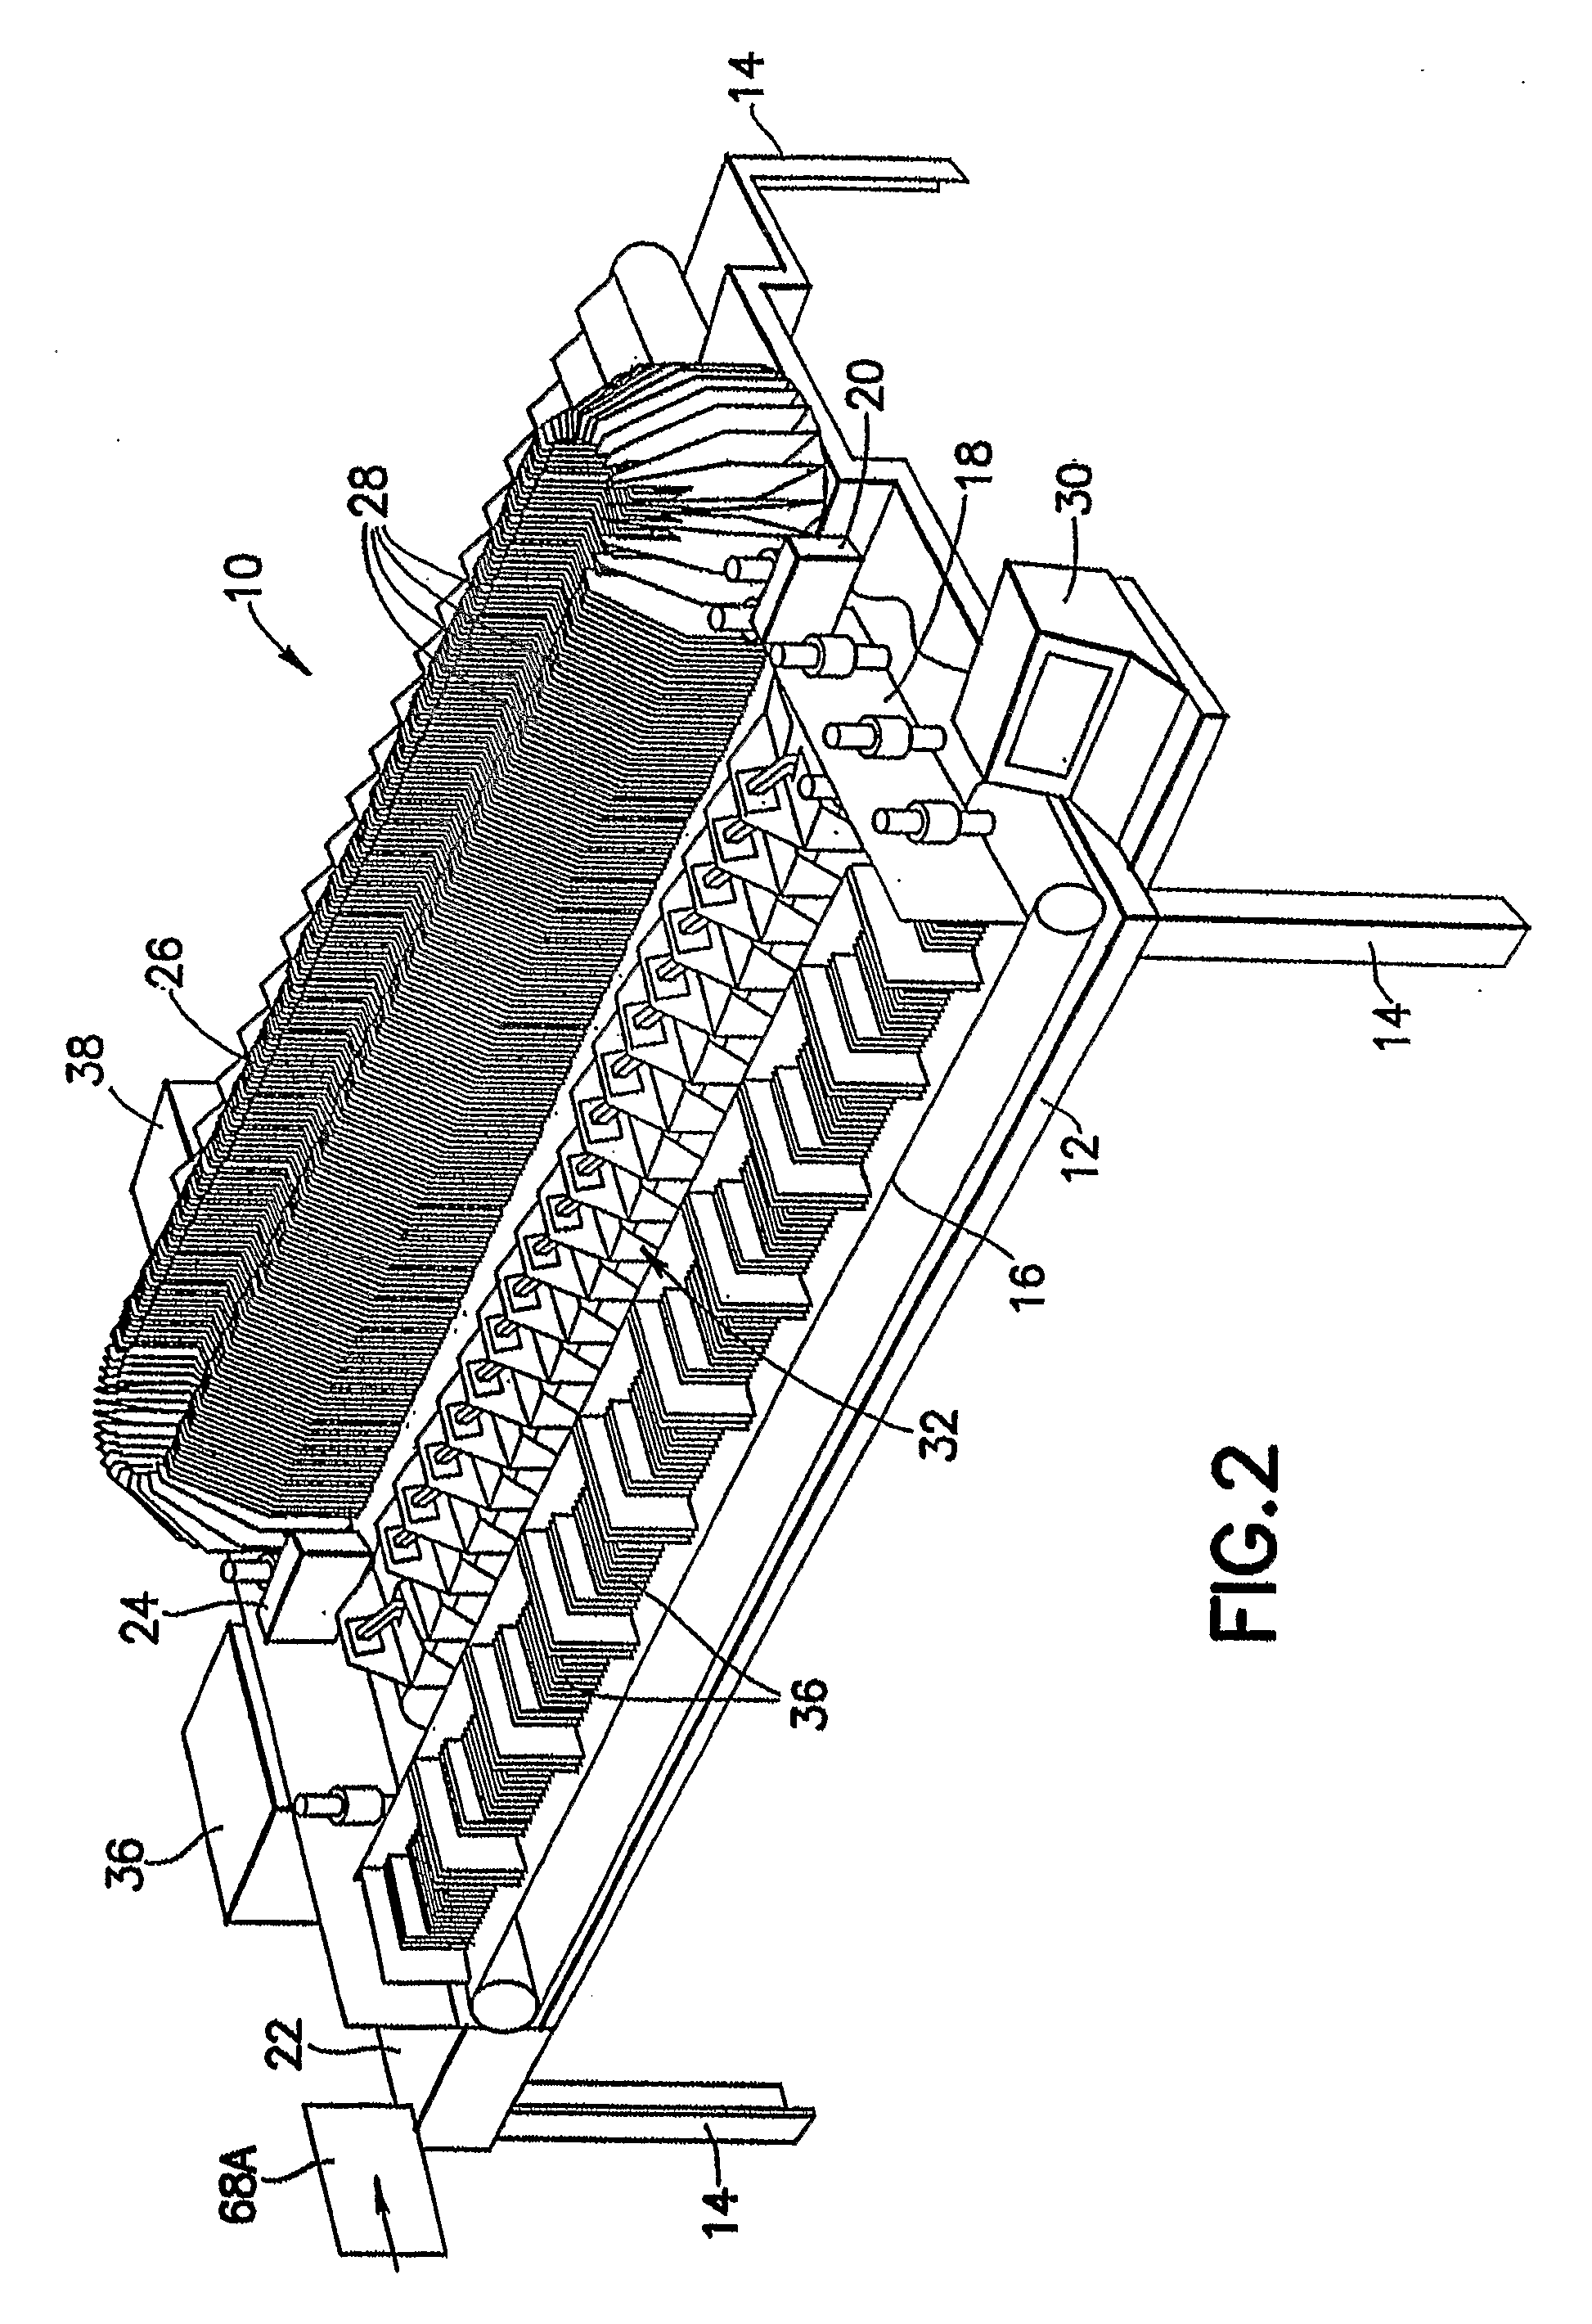 One-Pass Carrier Delivery Sequence Sorter